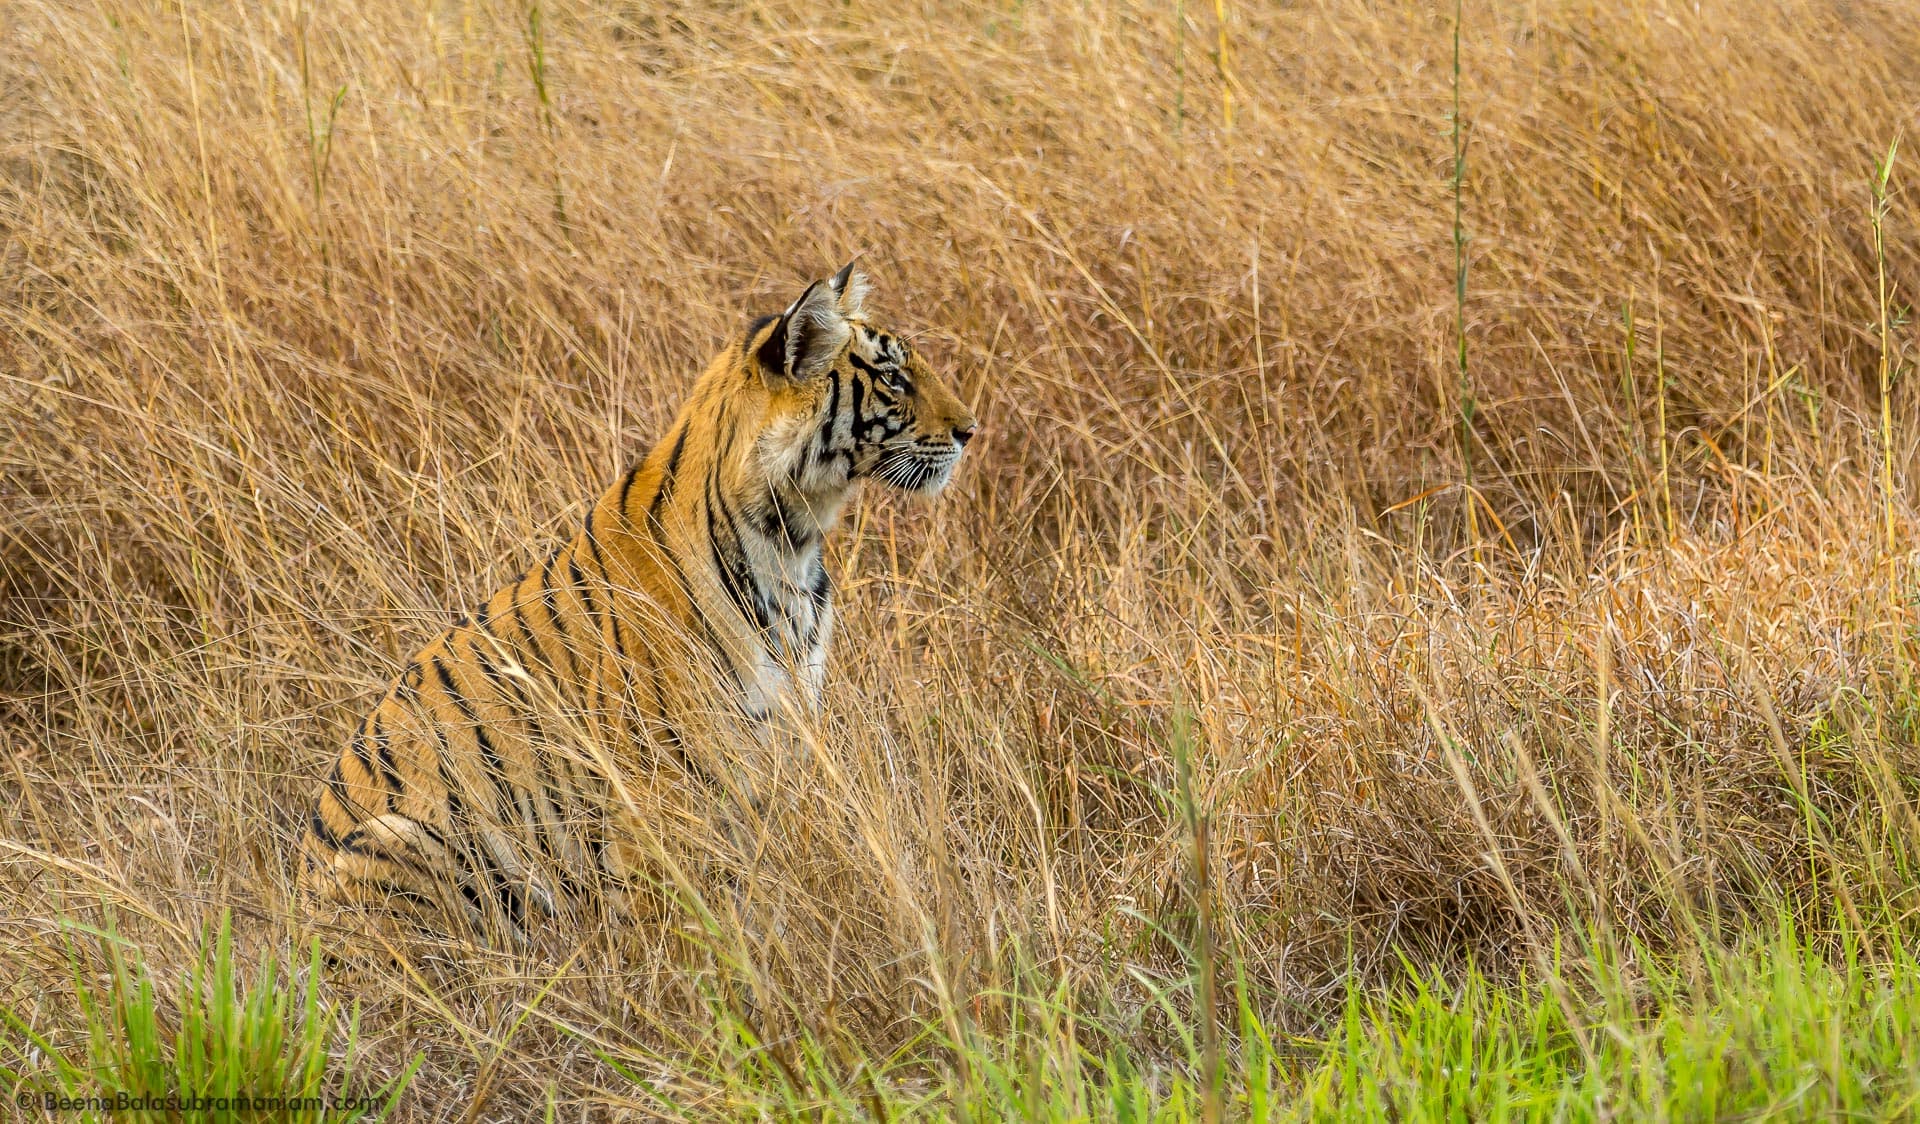 The Tiger Cub waits for her mother to return in the tall grasses of the Bandhavgarh national Park